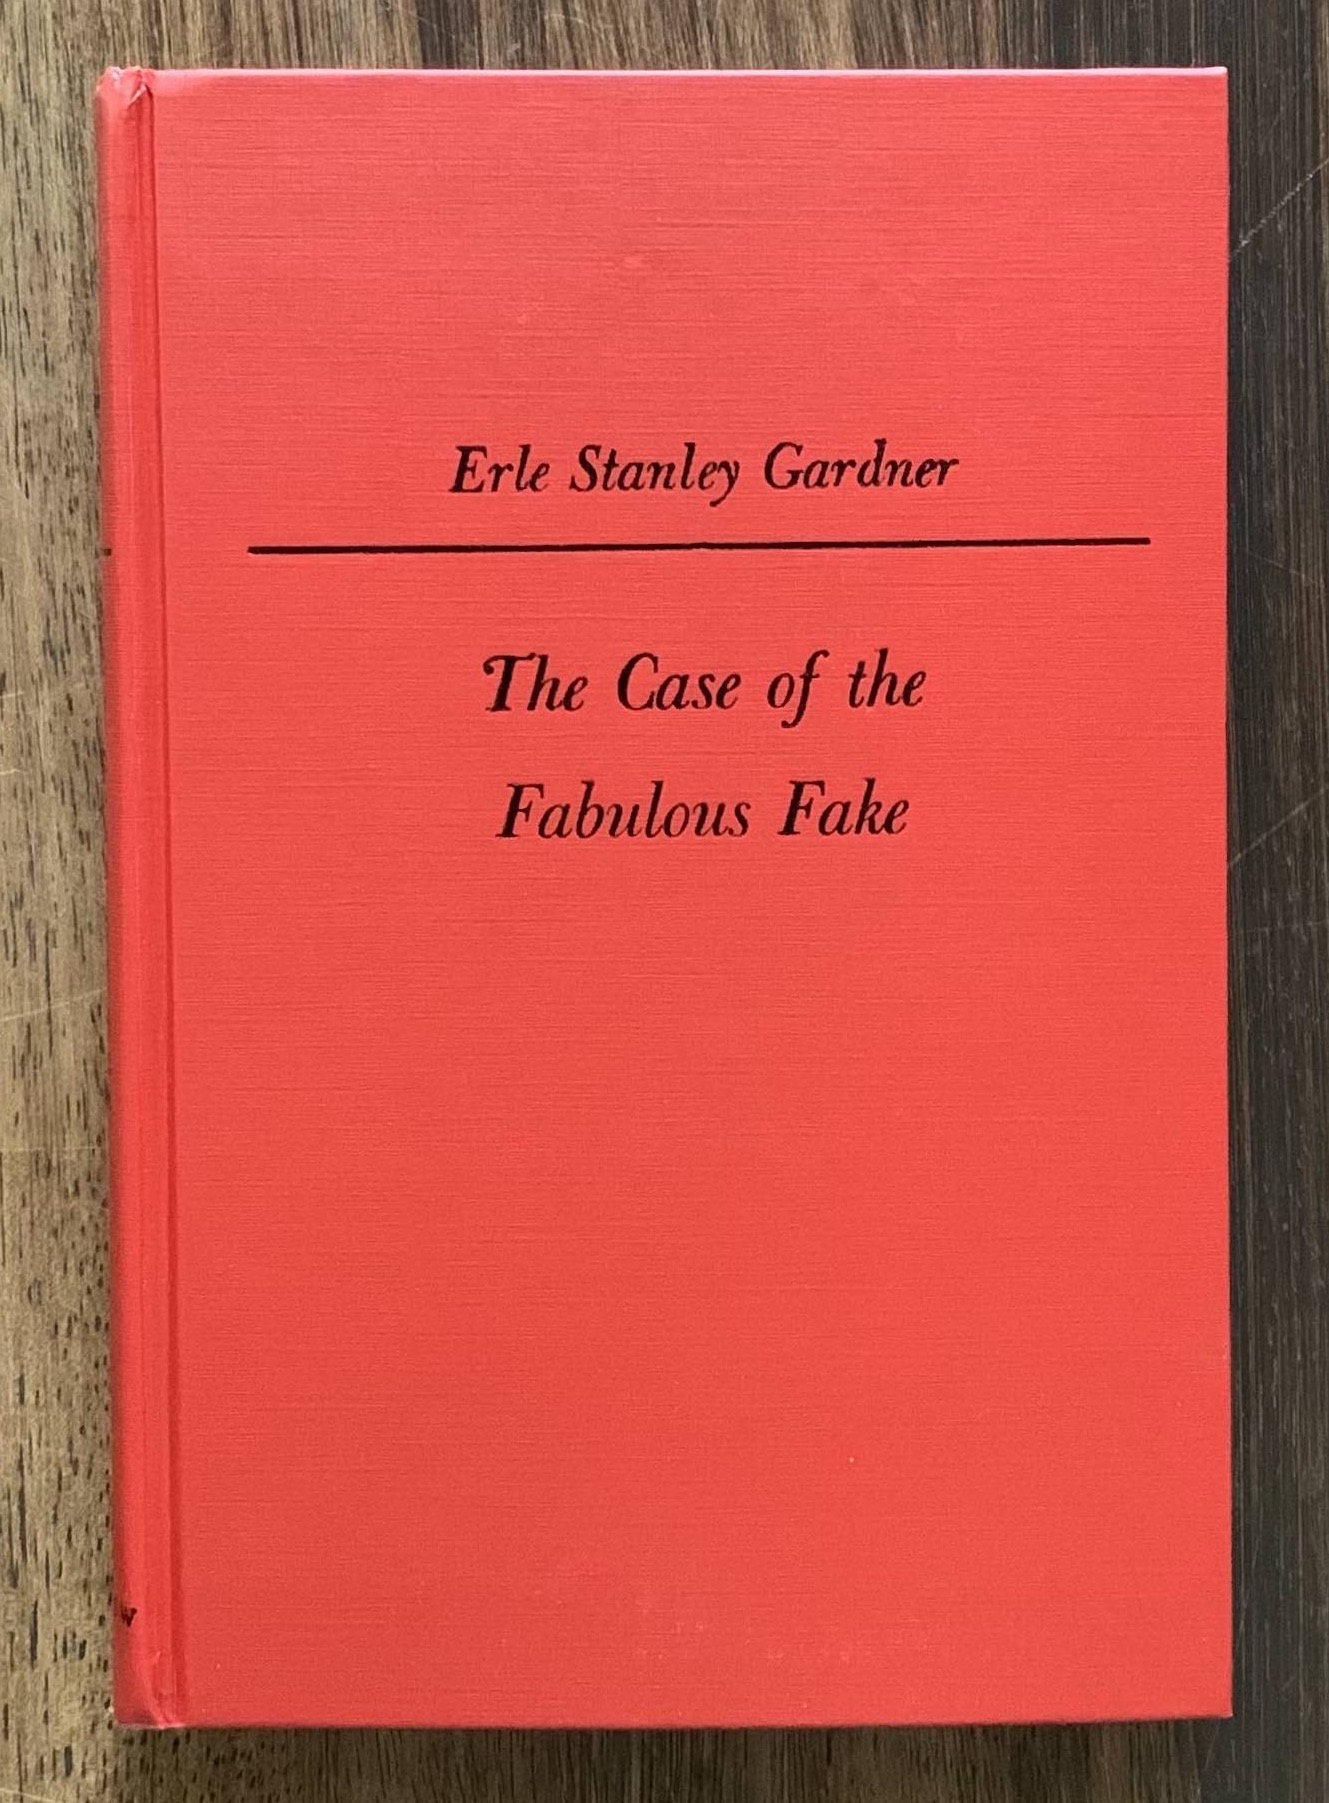 Antique Book the Case of the Fabulous Fake, by Erle Stanley Gardner 1969 30  